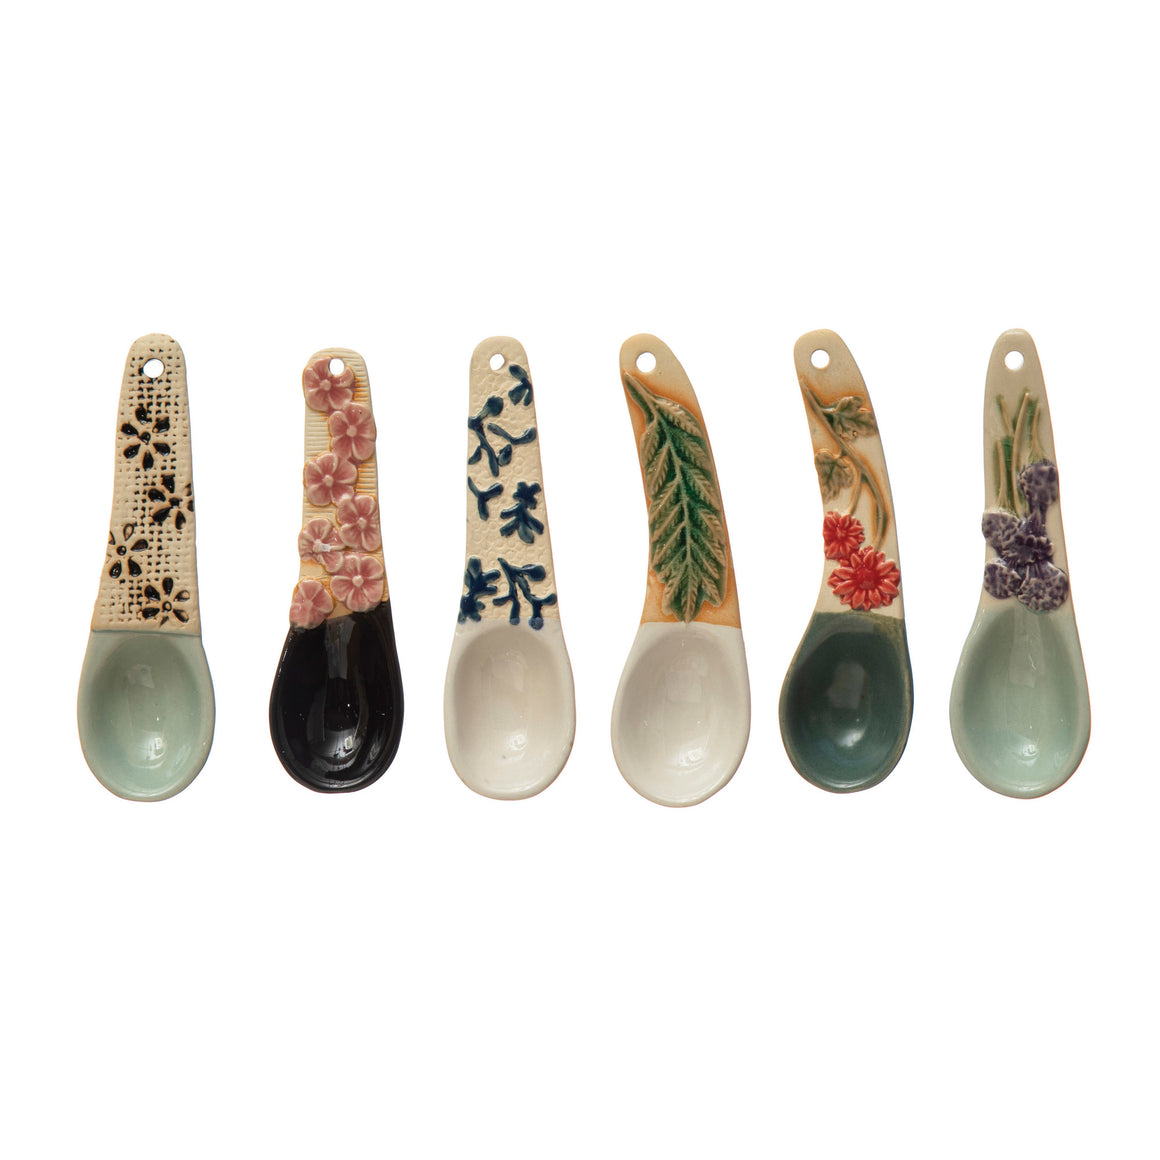 Whimsical Hand-Painted Spoons